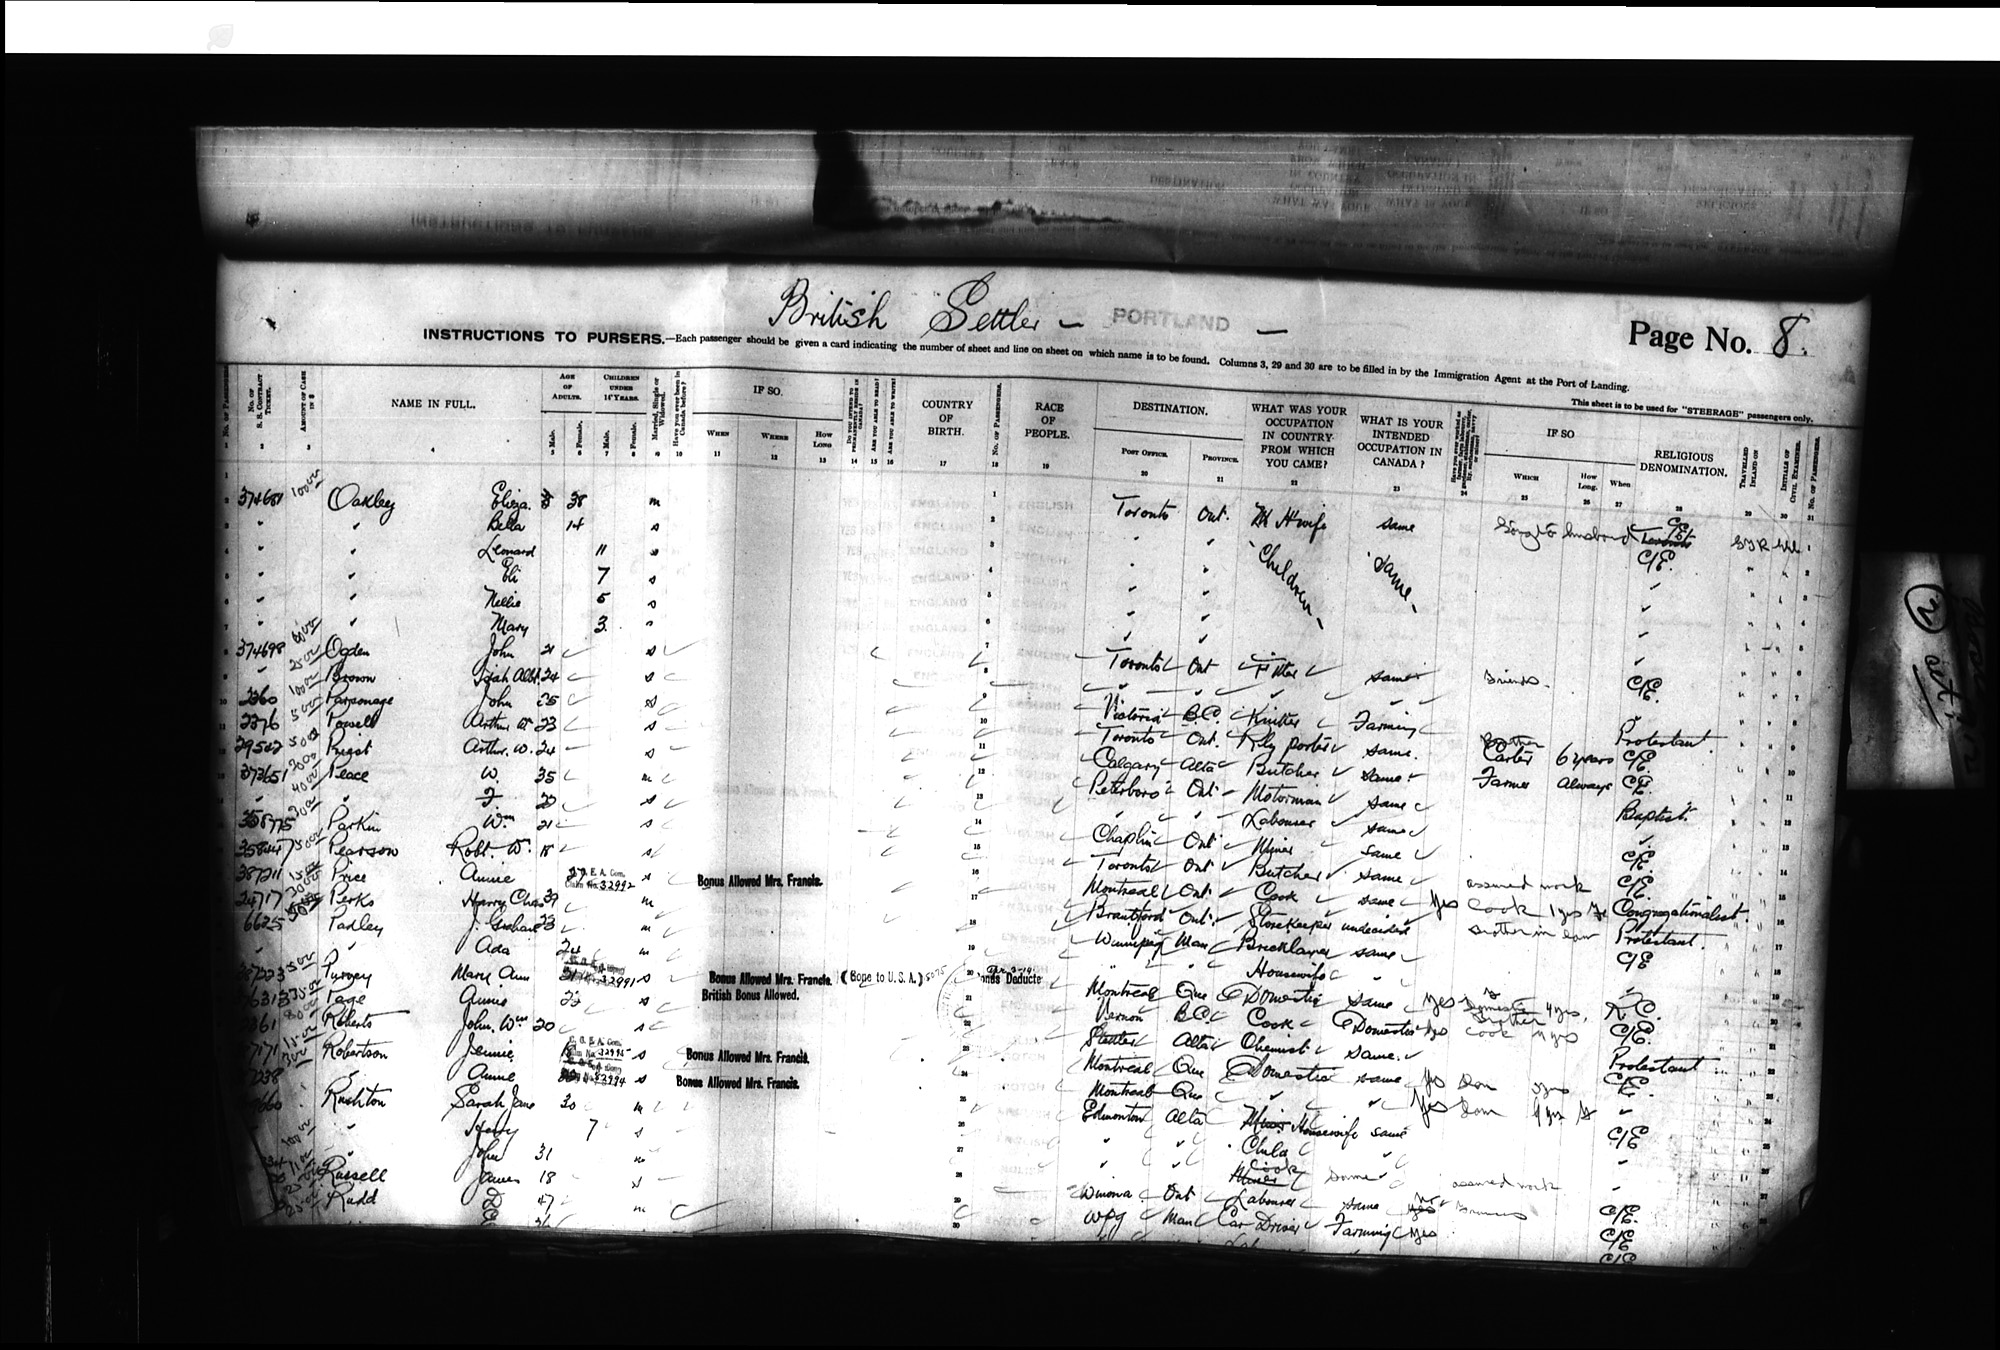 Digitized page of Passenger Lists for Image No.: CANIMM1913PLIST_0000406960-00181